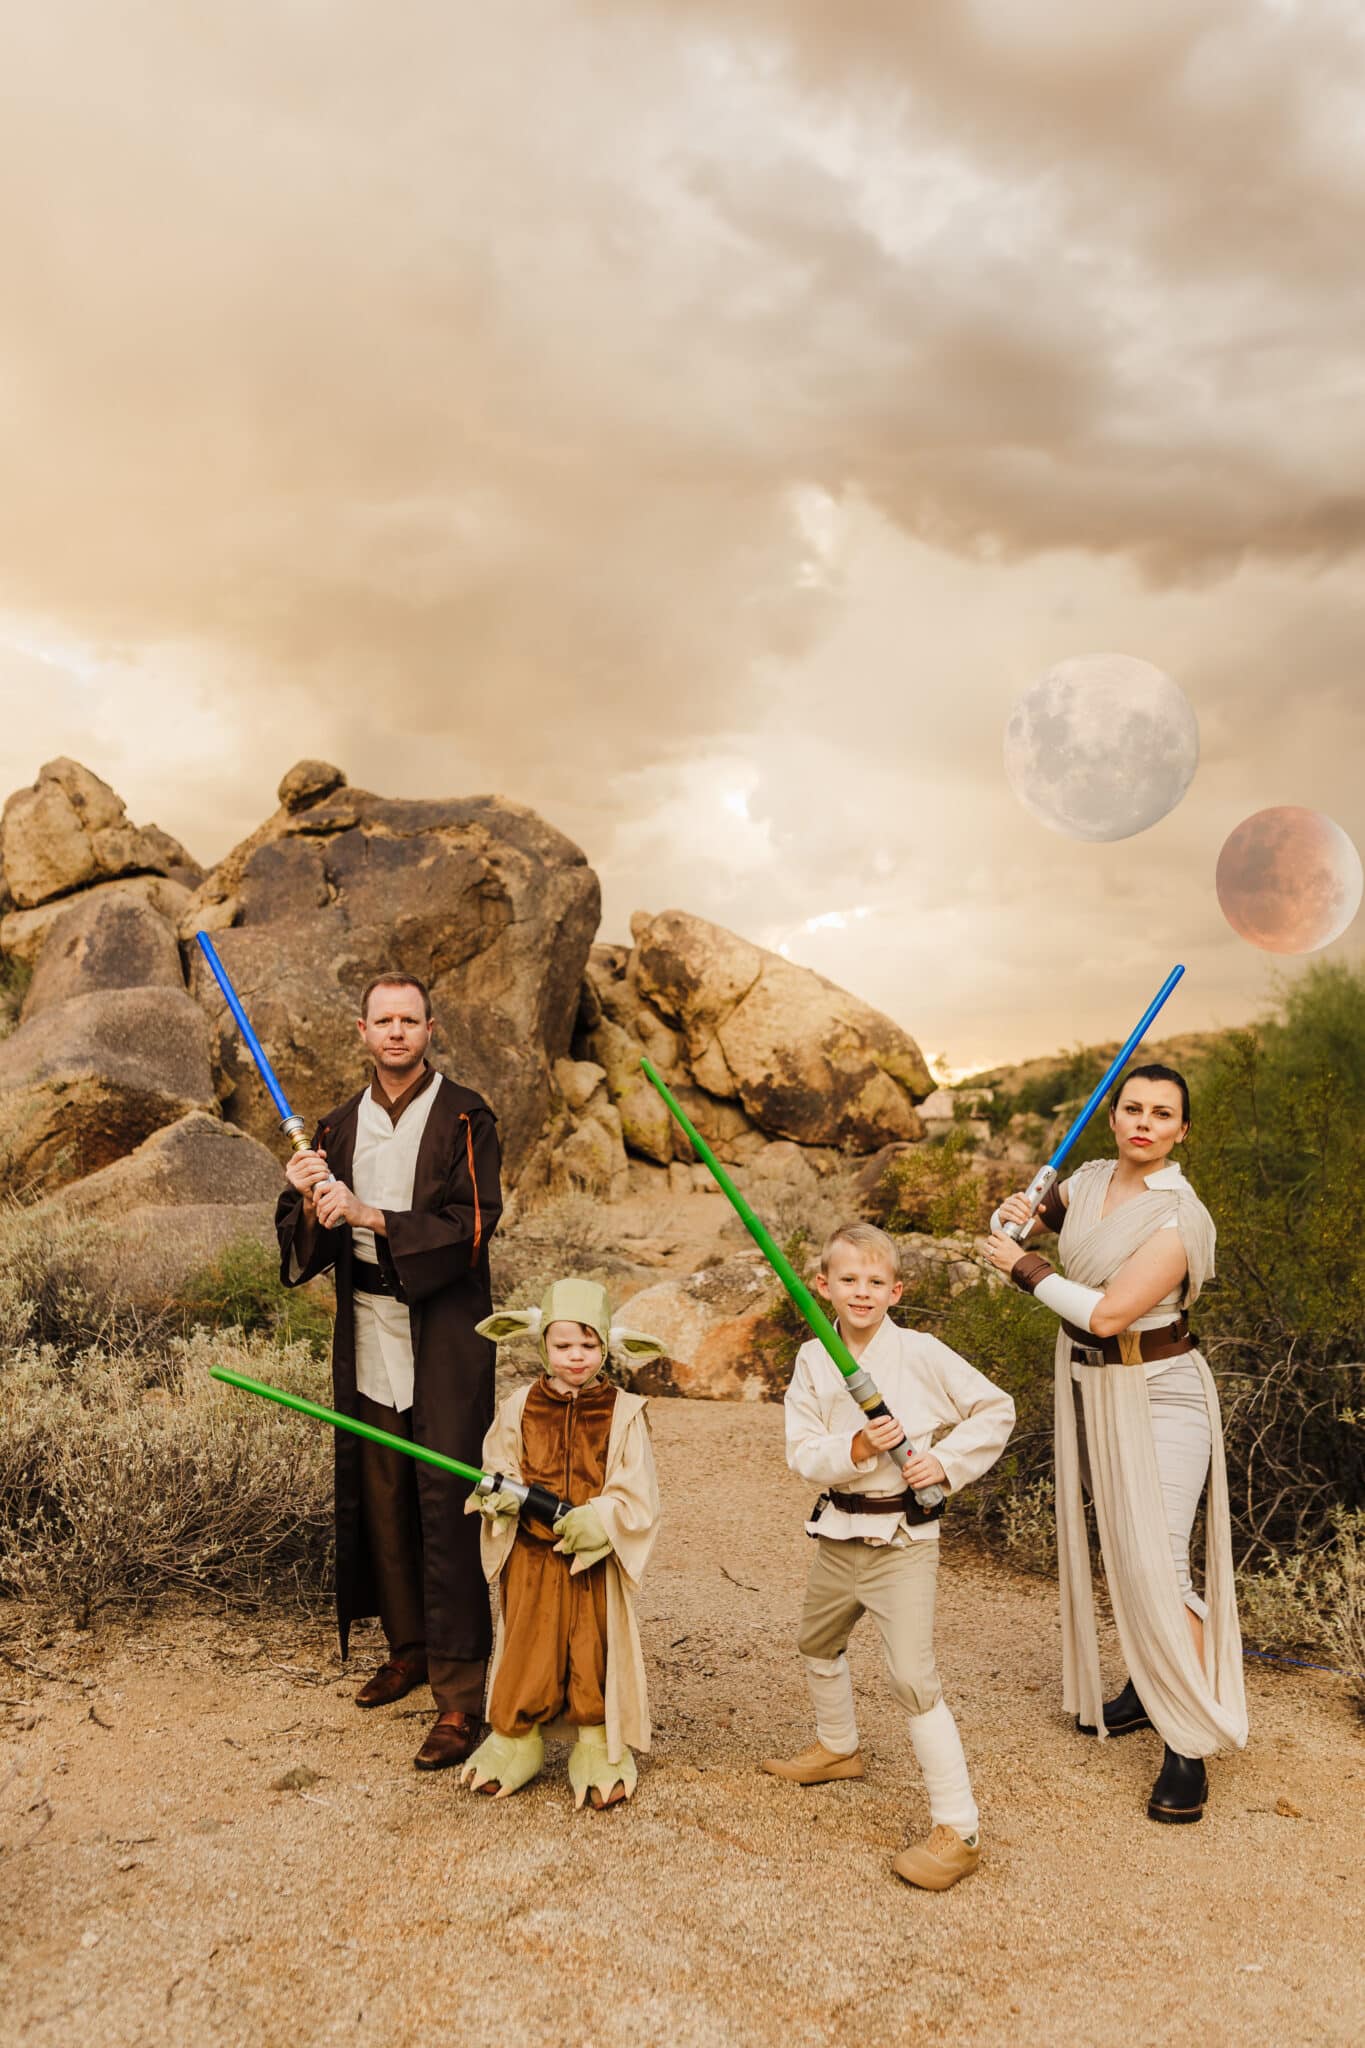 Family Star Wars Jedi Costume with a family dressed as Obi Wan, Yoda, Luke Skywalker, and Rey all holding lightsabers. 